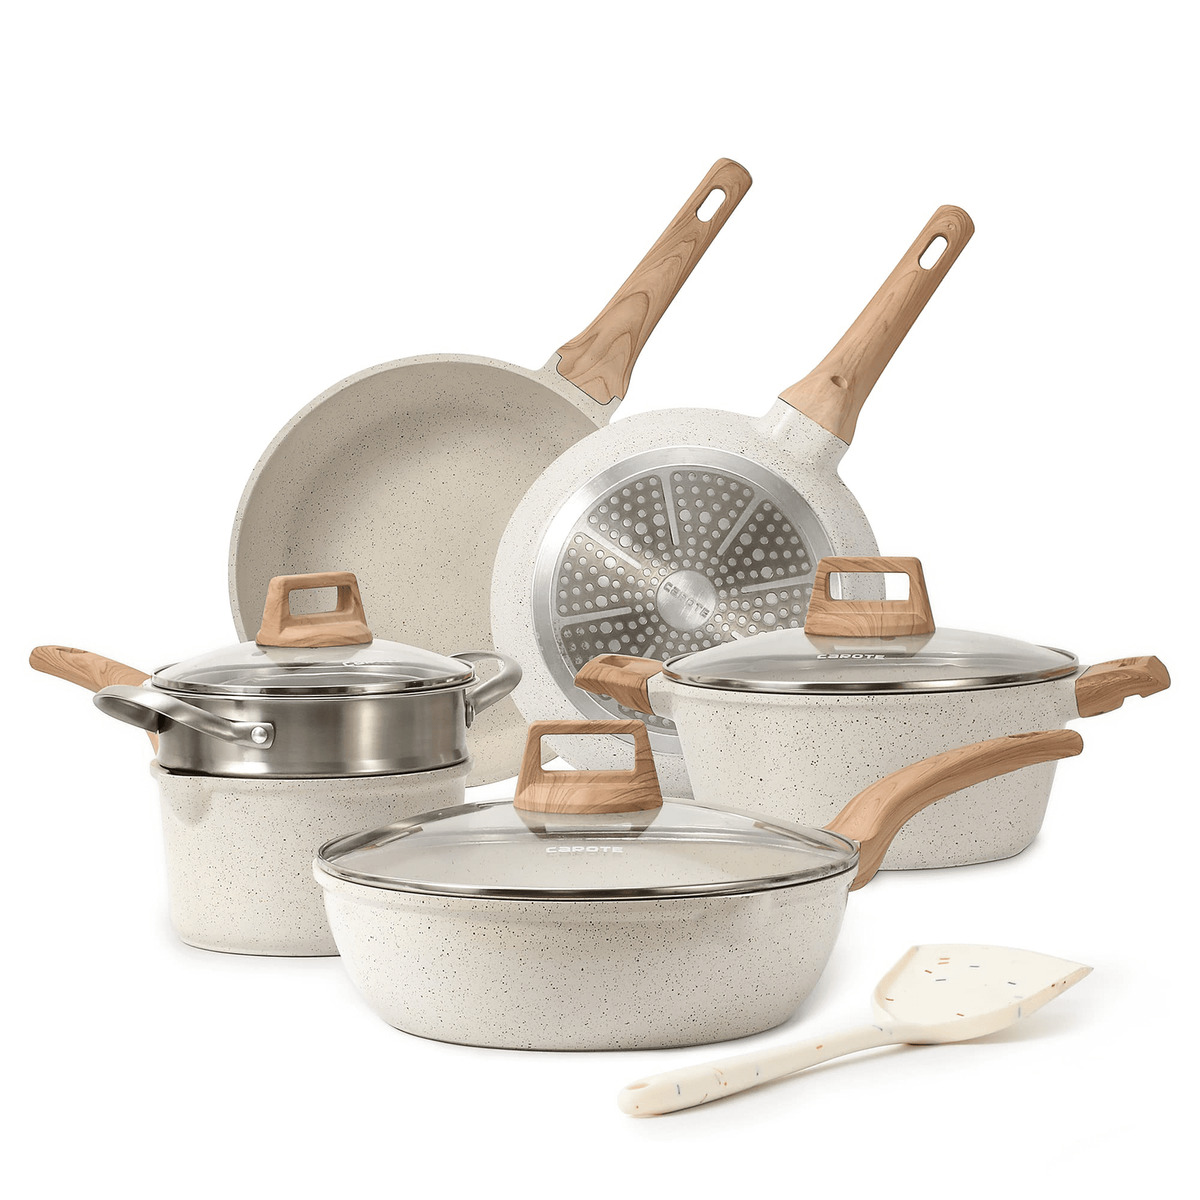 Carote Pots and Pans Set Nonstick,White Granite Induction Kitchen